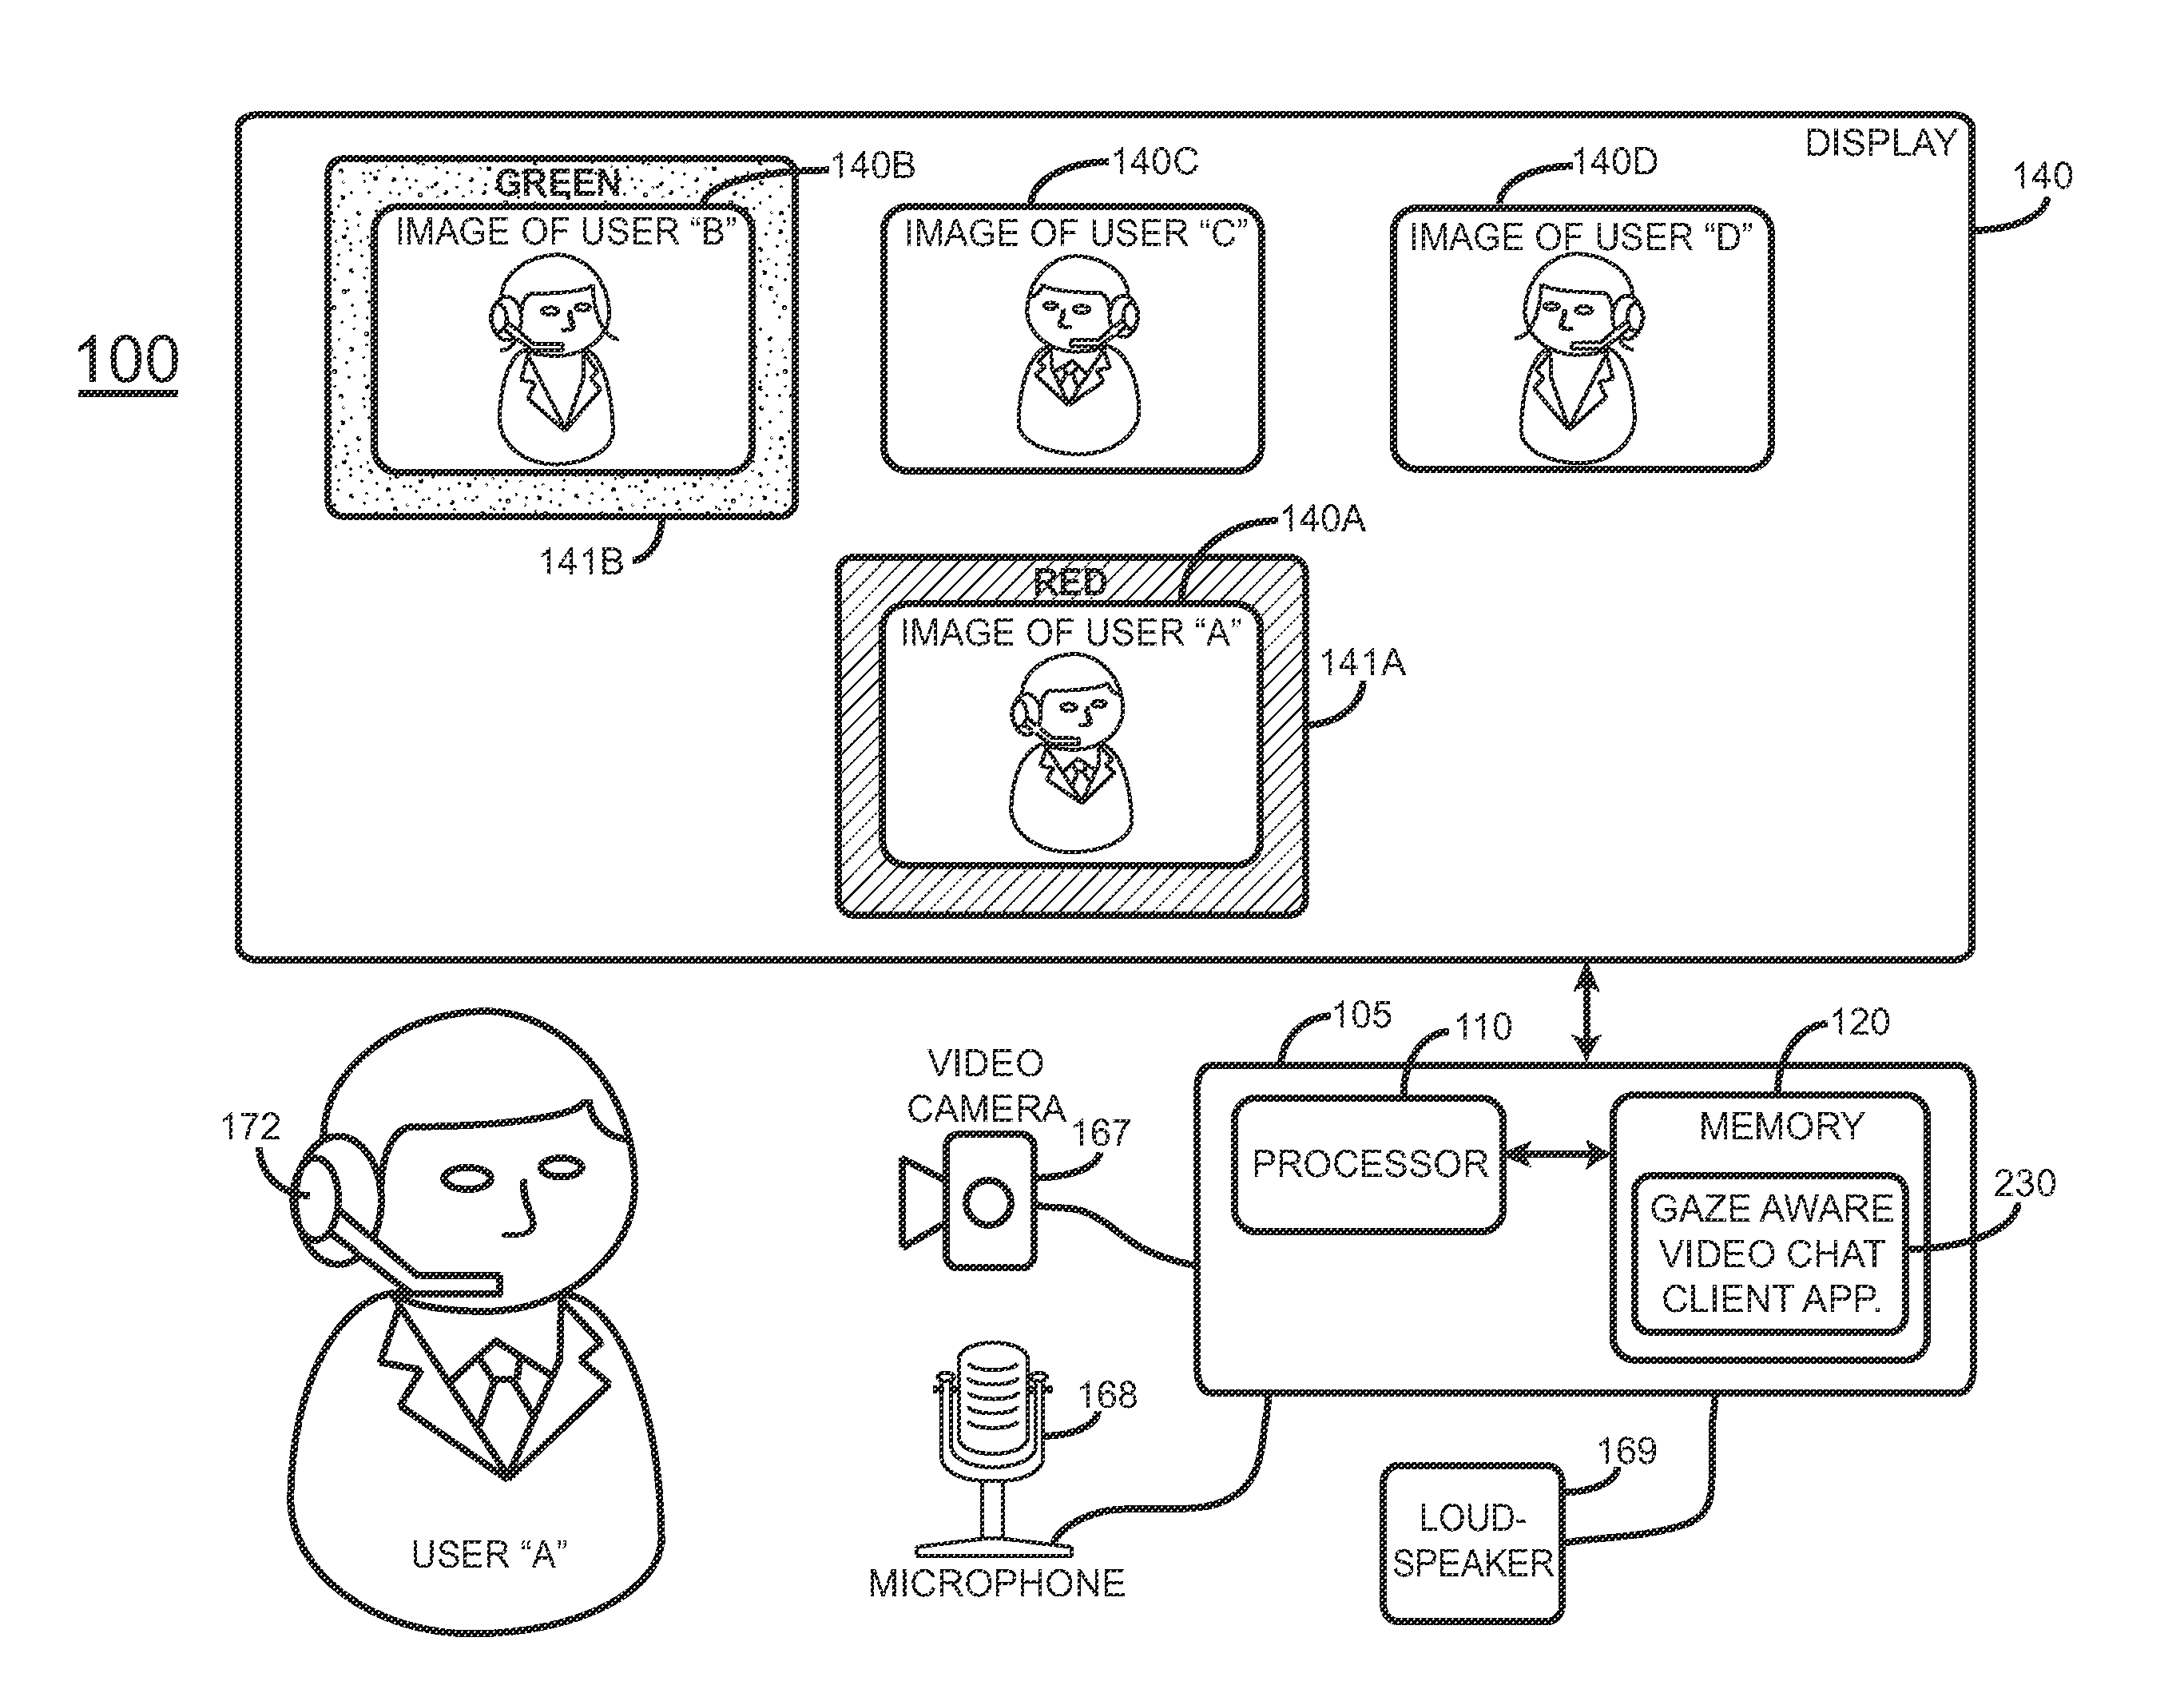 Multi-participant audio/video communication system with participant role indicator